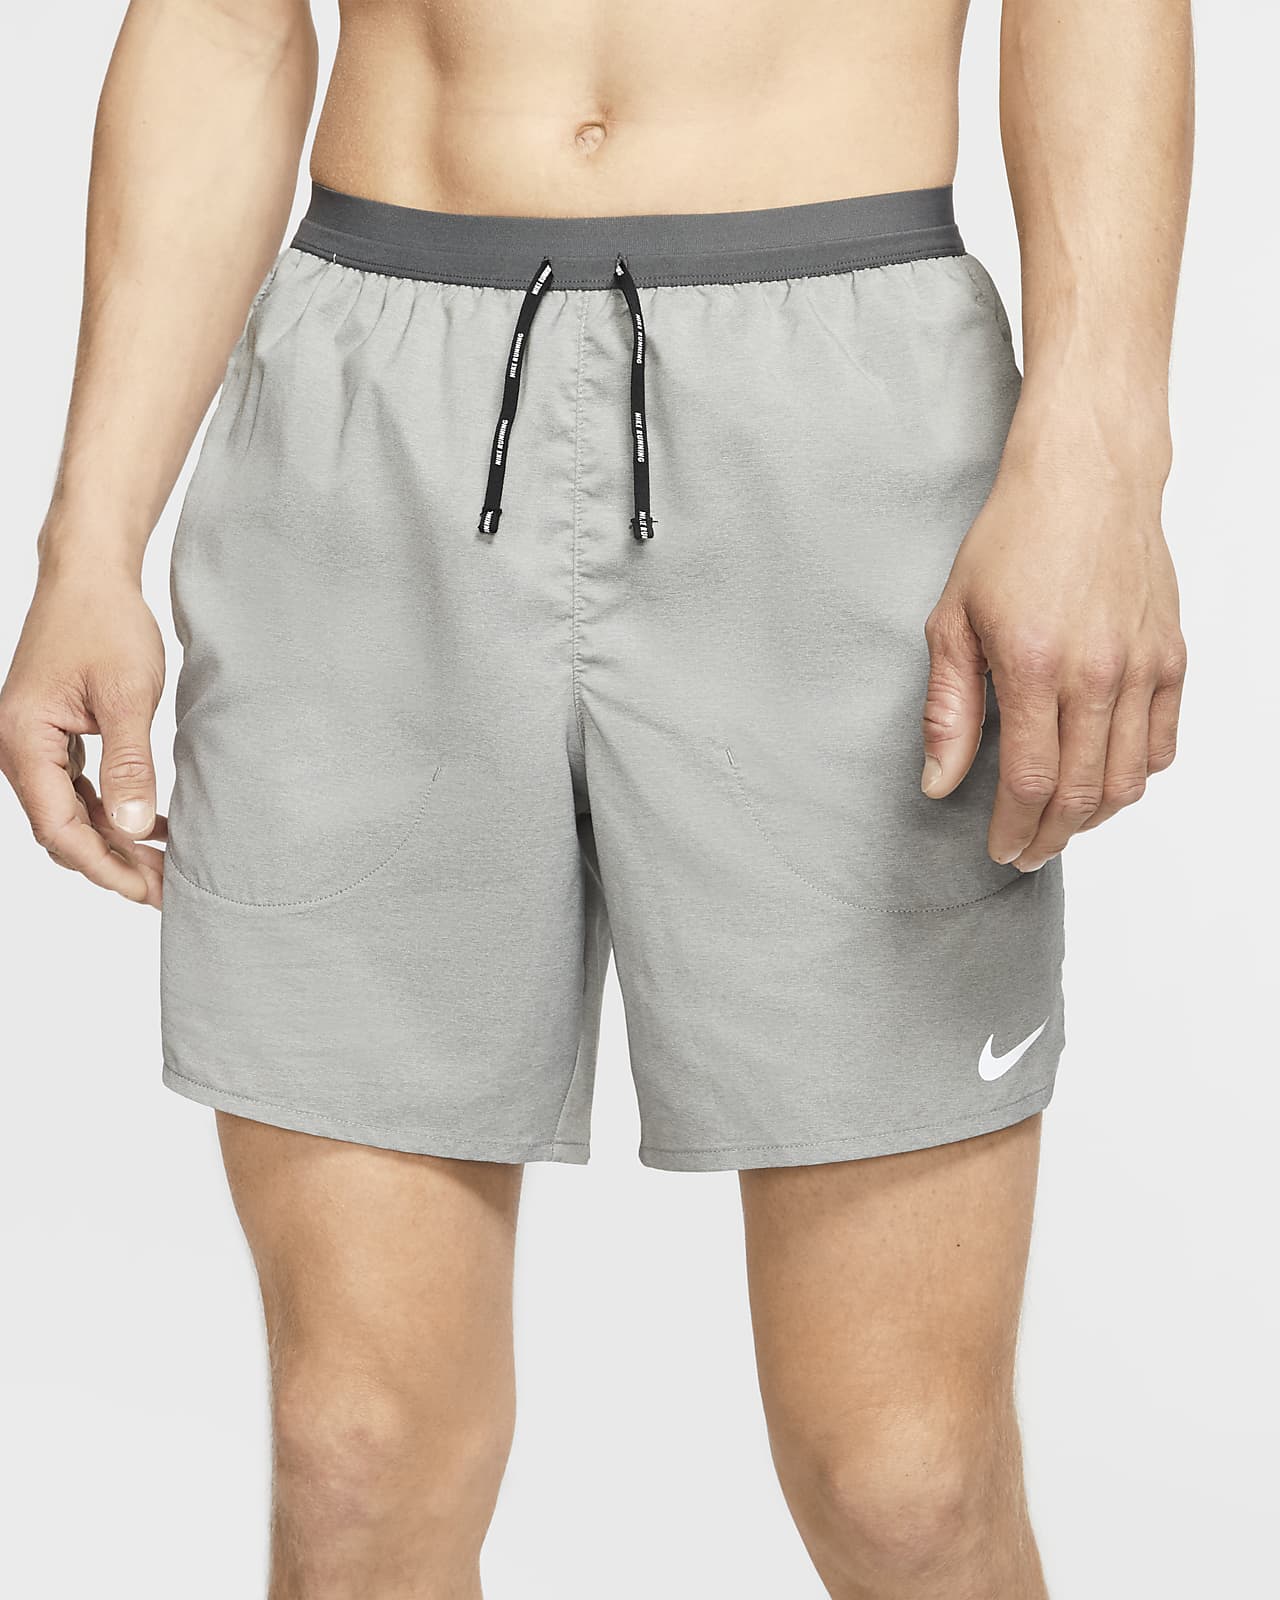 nike dri fit running shorts with built in briefs mens